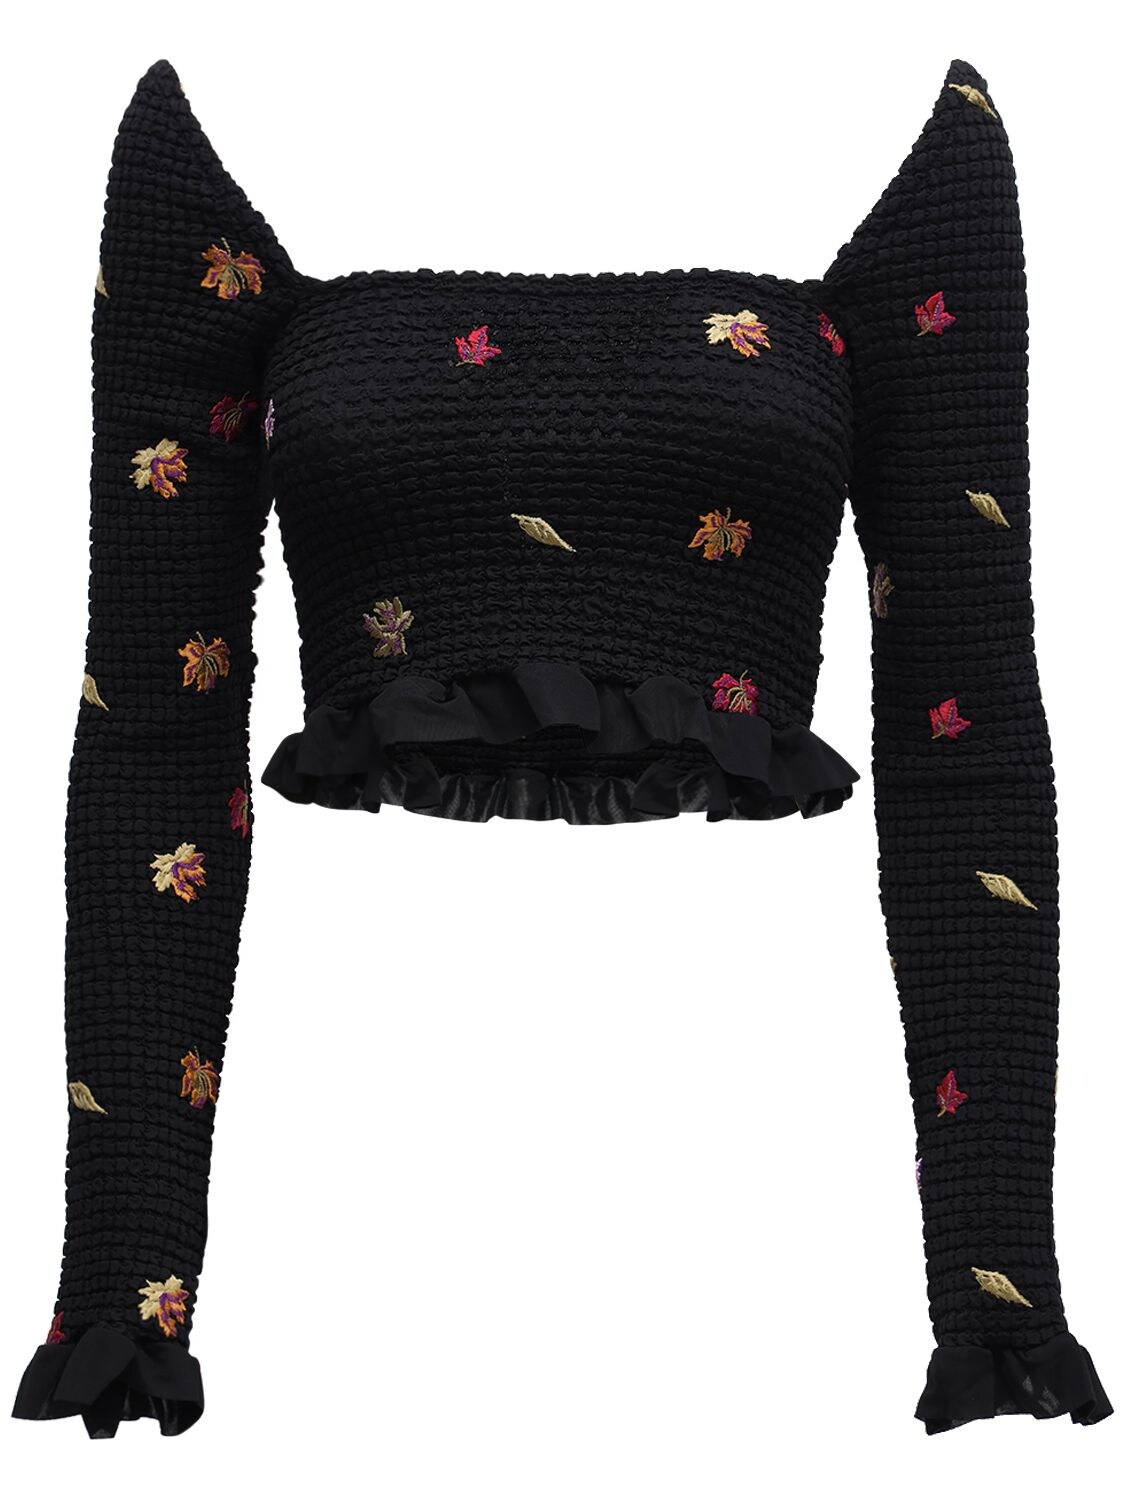 Embroidered Long Sleeve Top